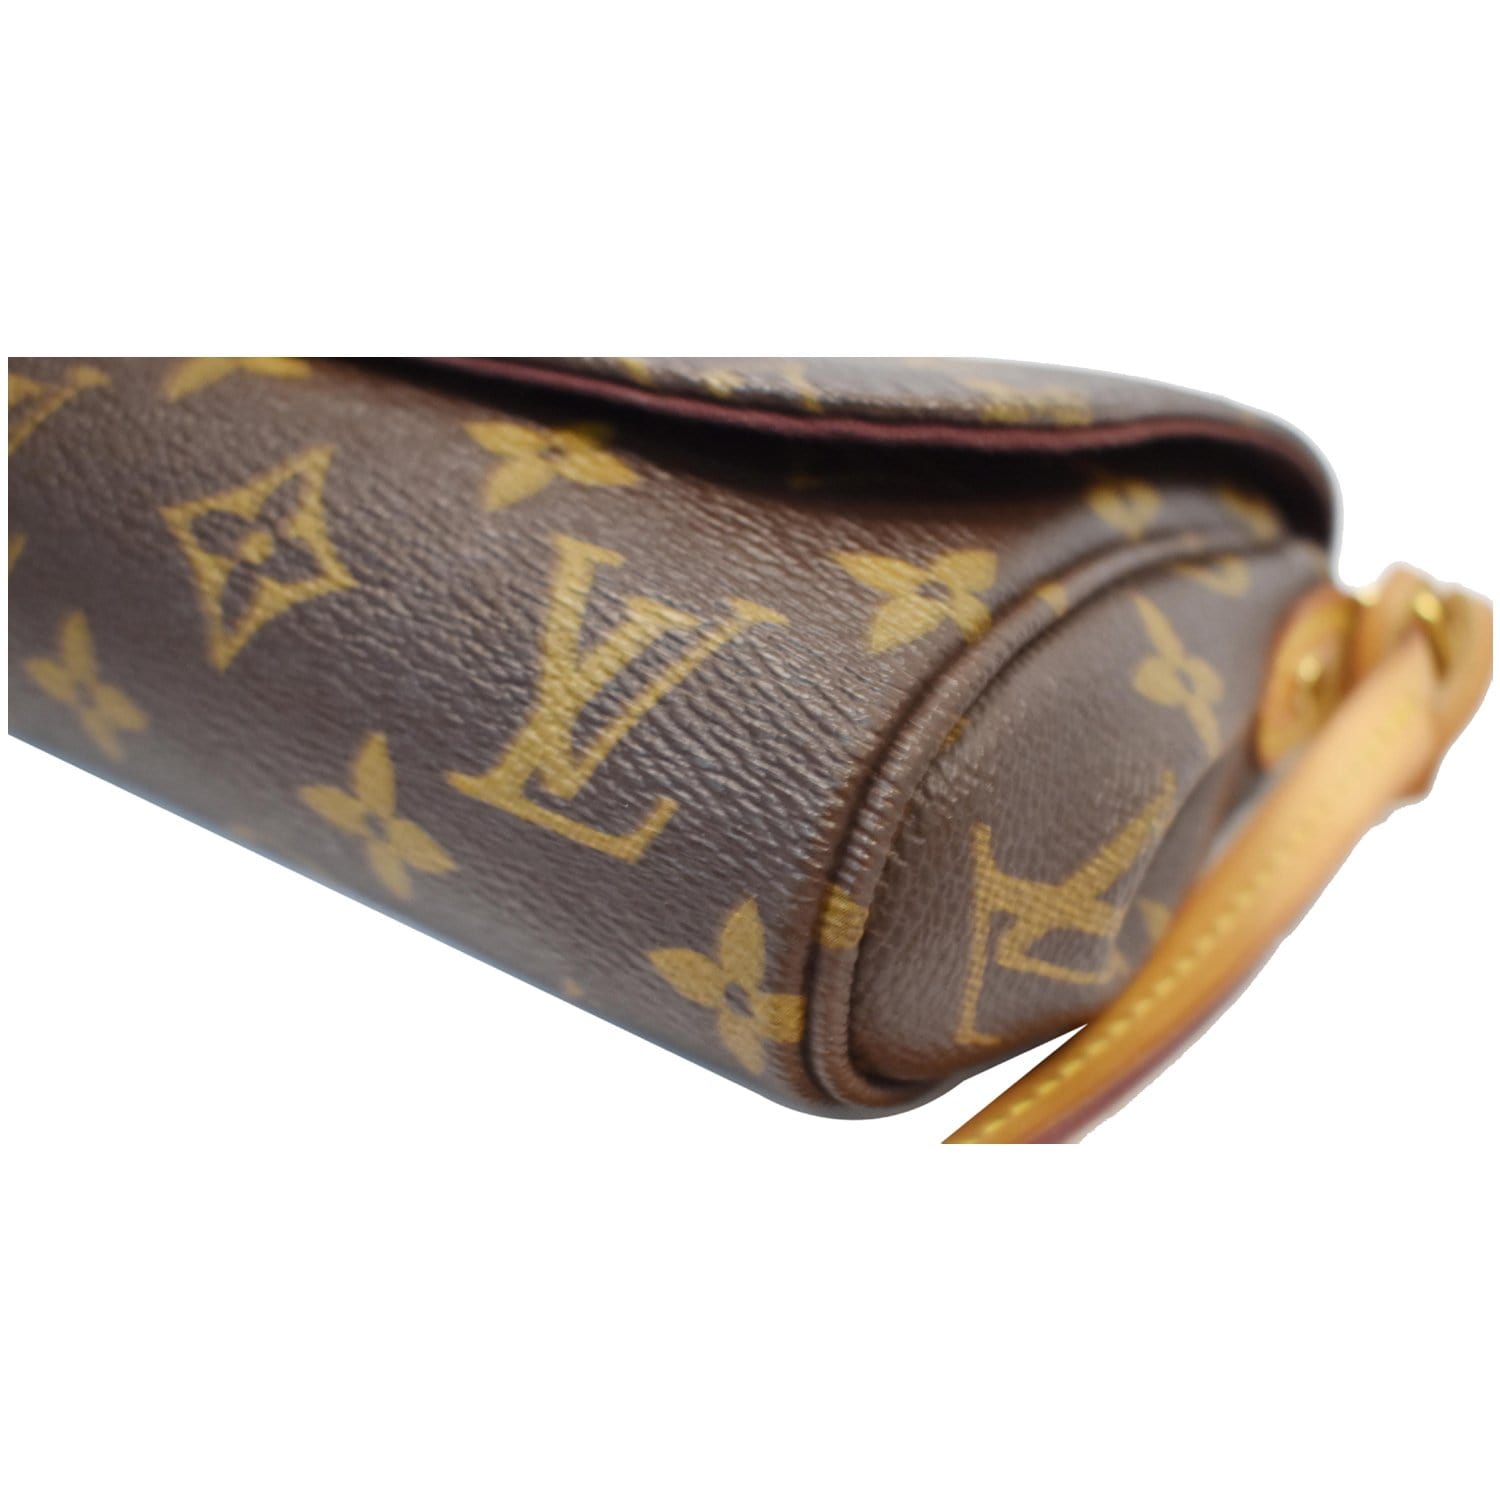 10 Great LOUIS VUITTON Shoulder and Crossbody Bags To CONSIDER 